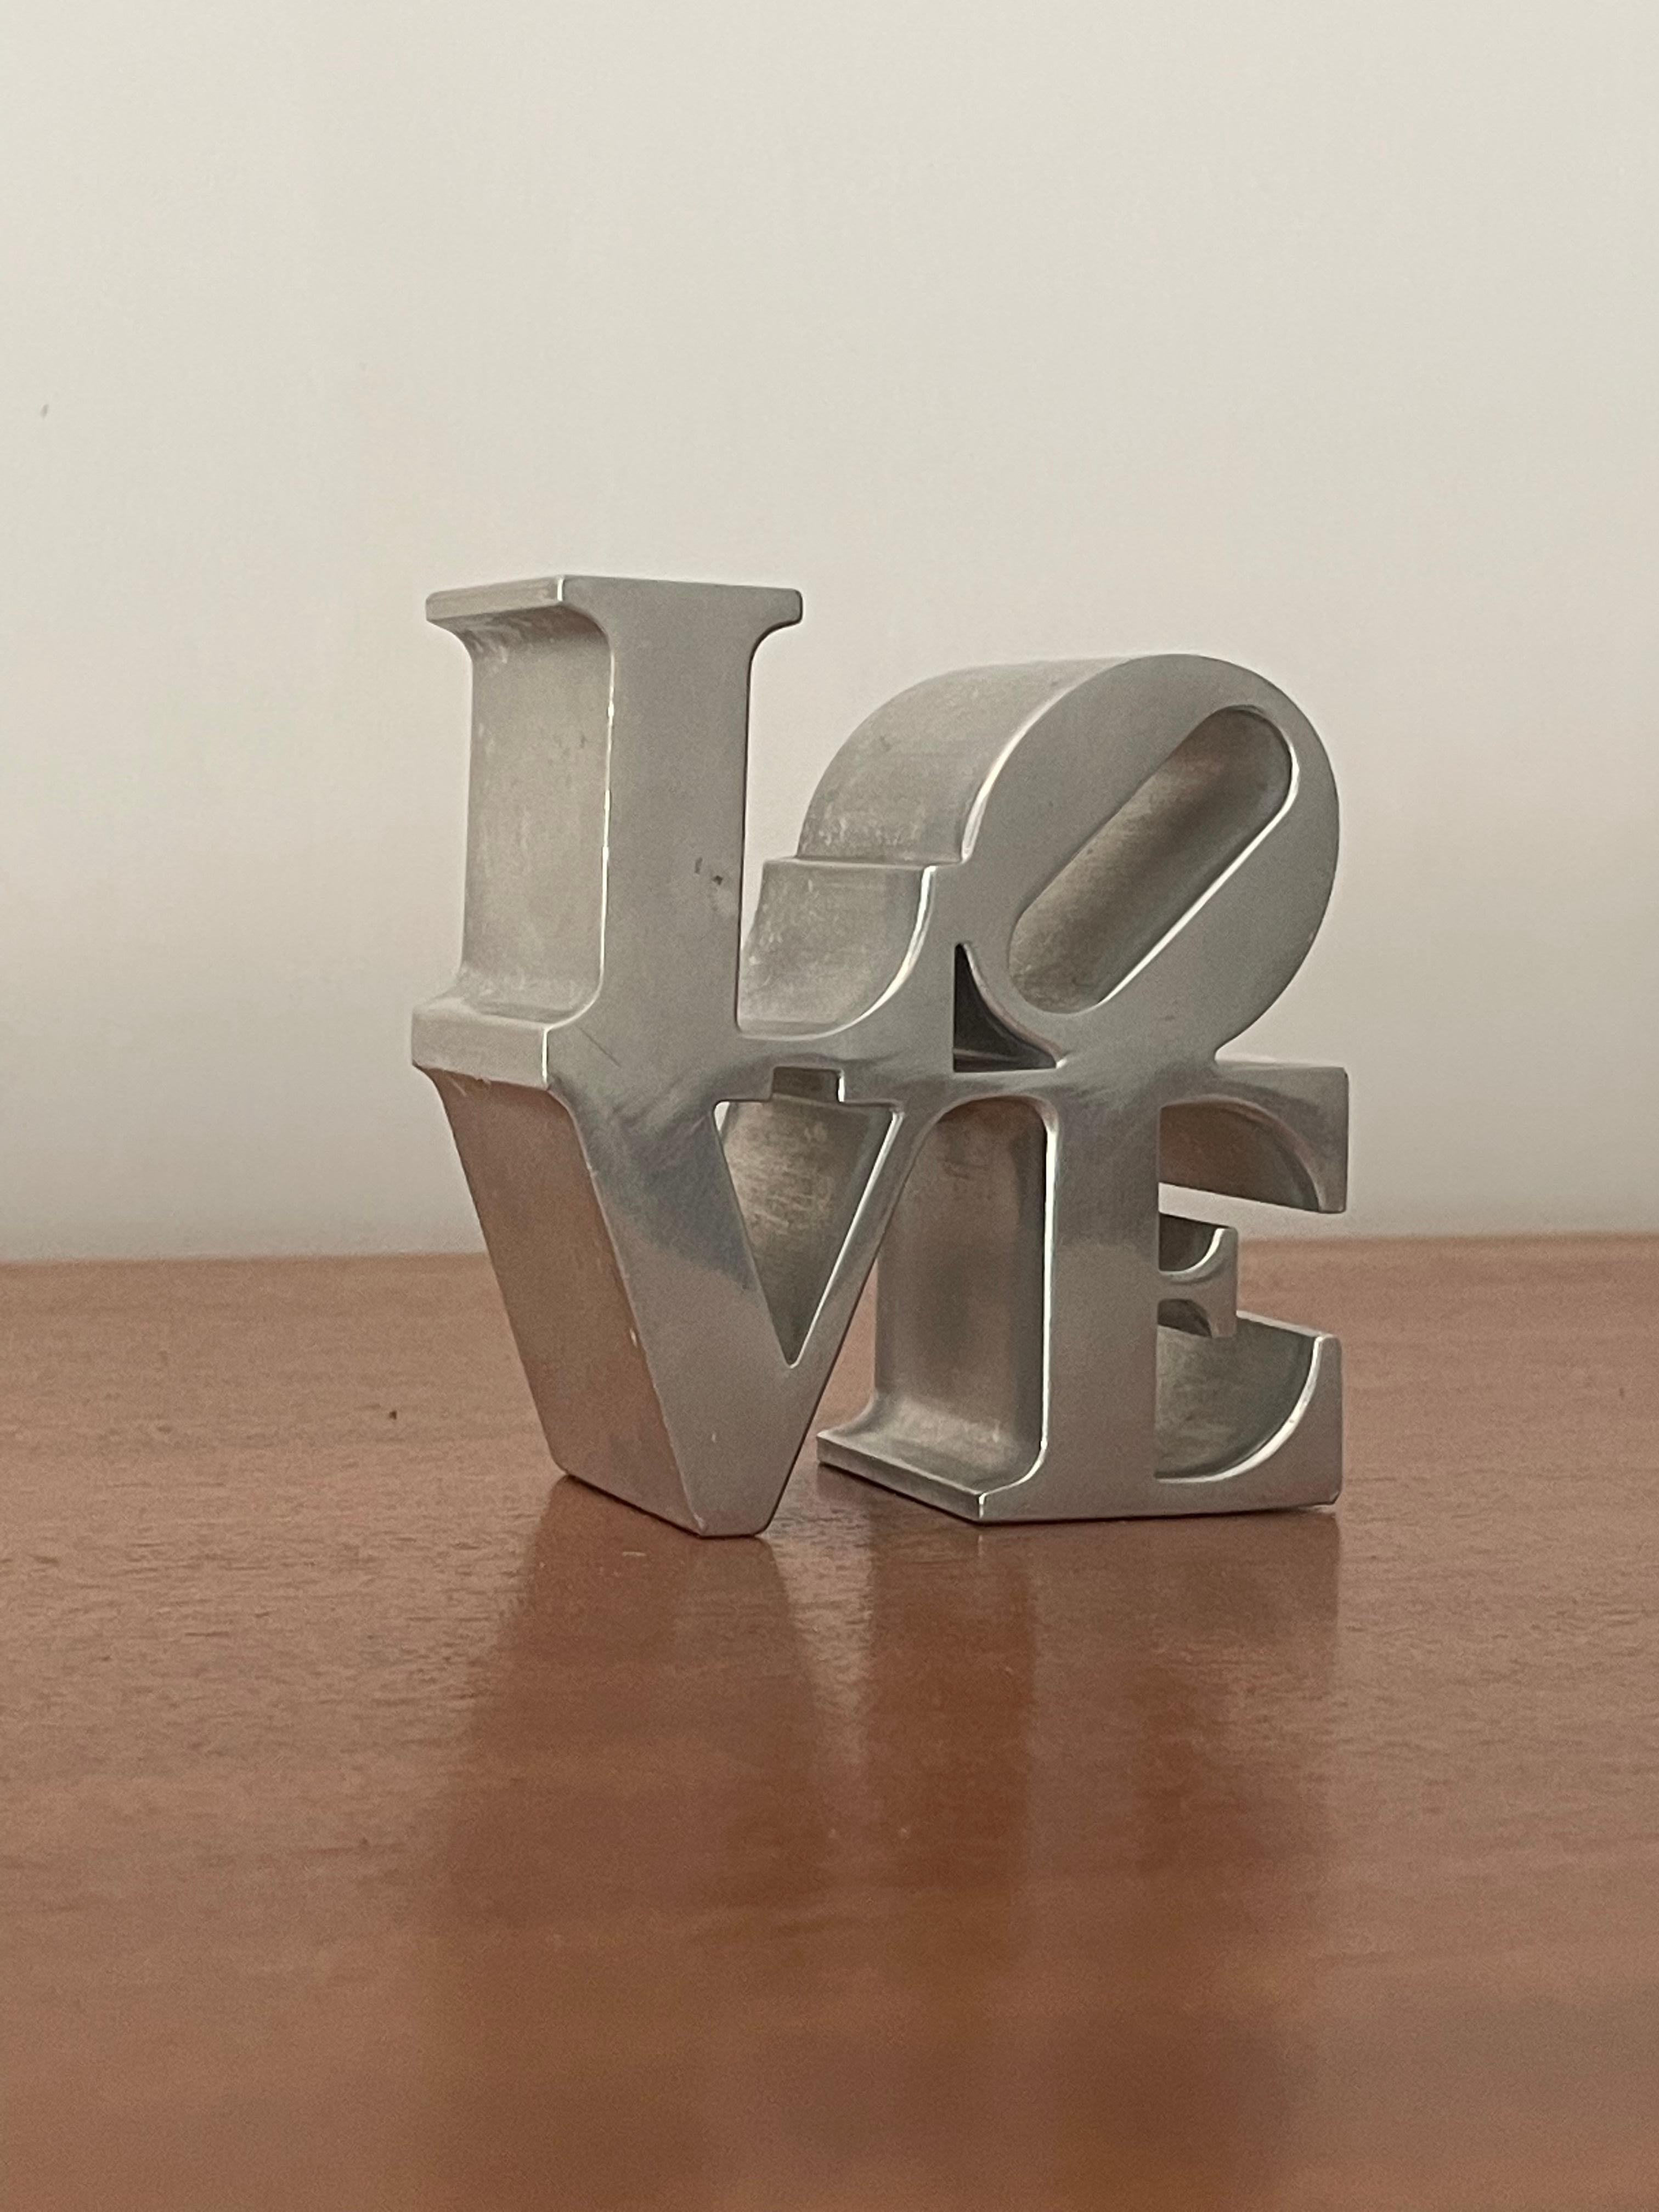 A paperweight in metal after Robert Indiana. Likely purchased at MoMA. This piece would add character to any desk or office environment.